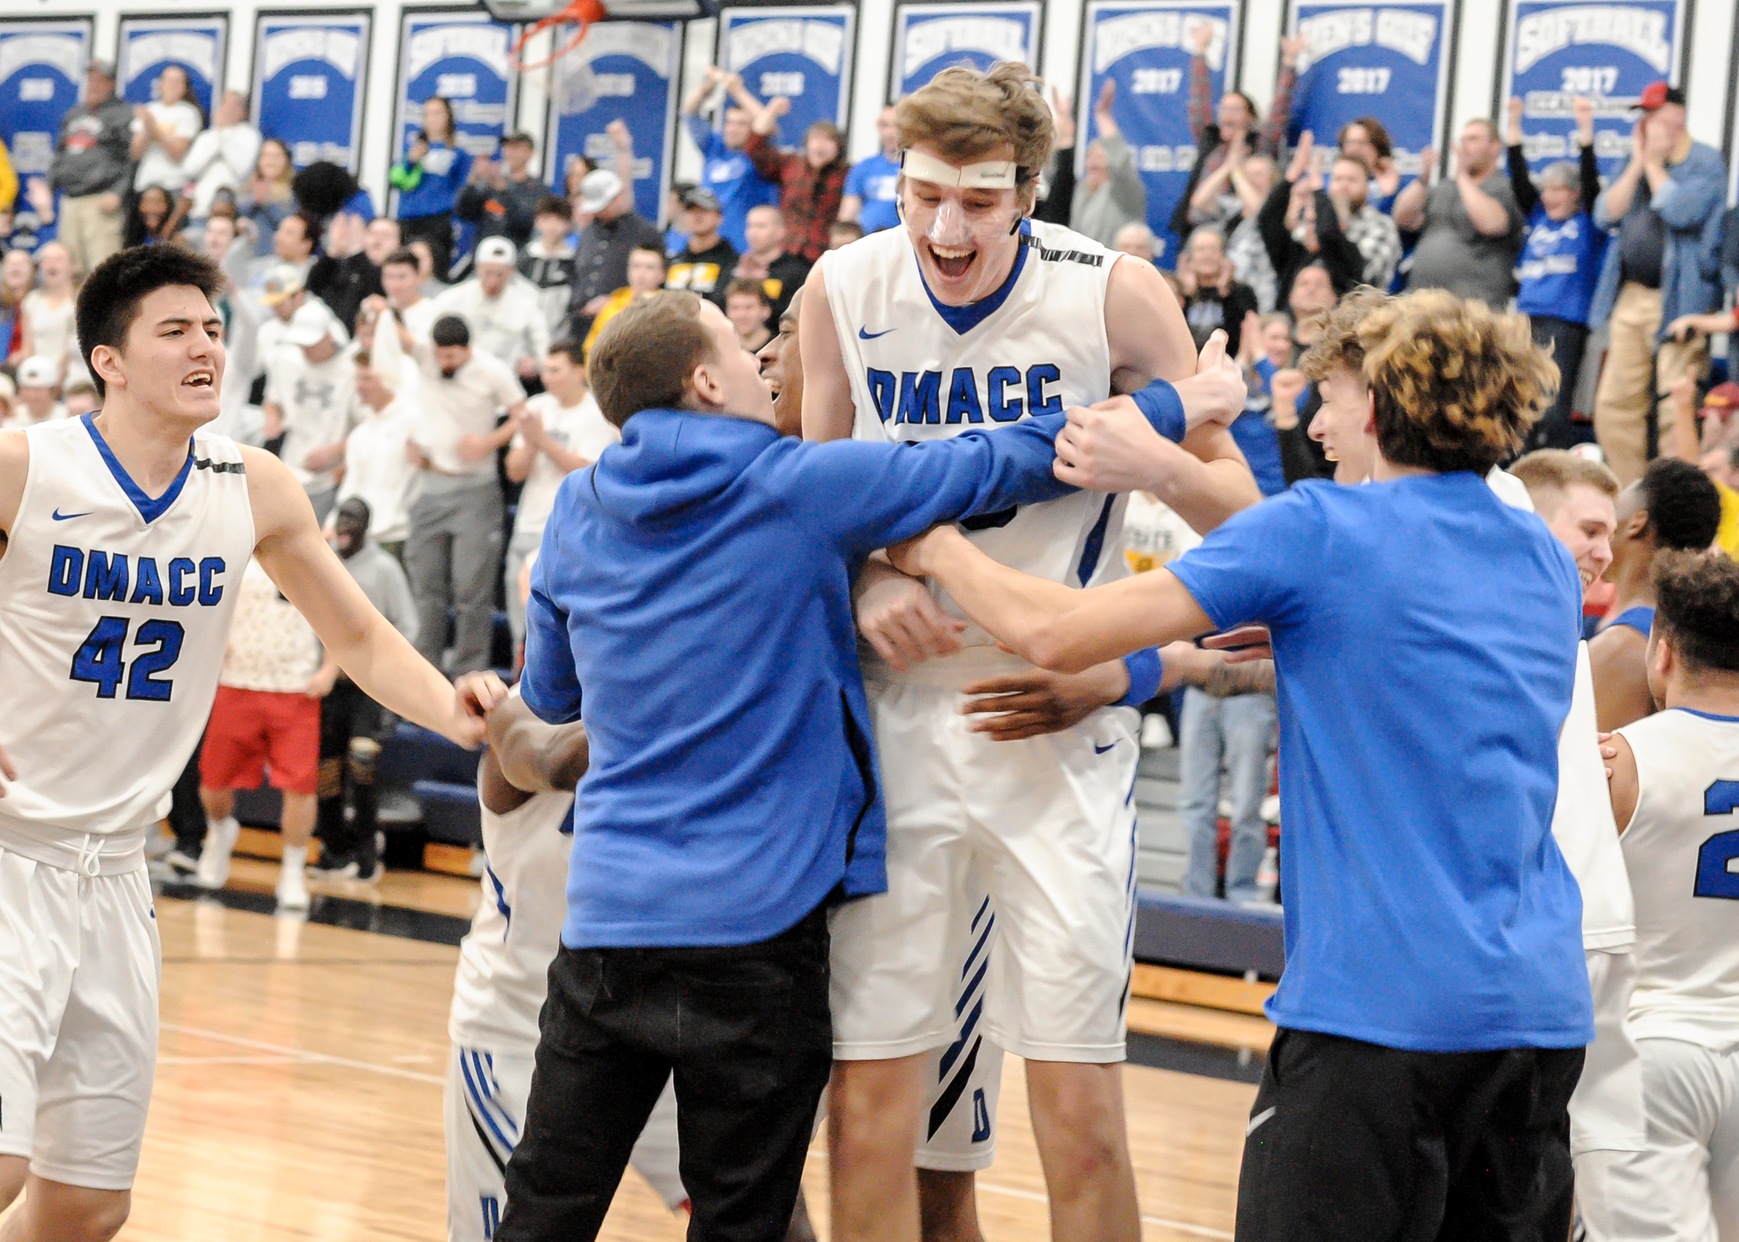 DMACC men's basketball team tops NIACC for Region XI title; advances to national tournament for first time since 2015